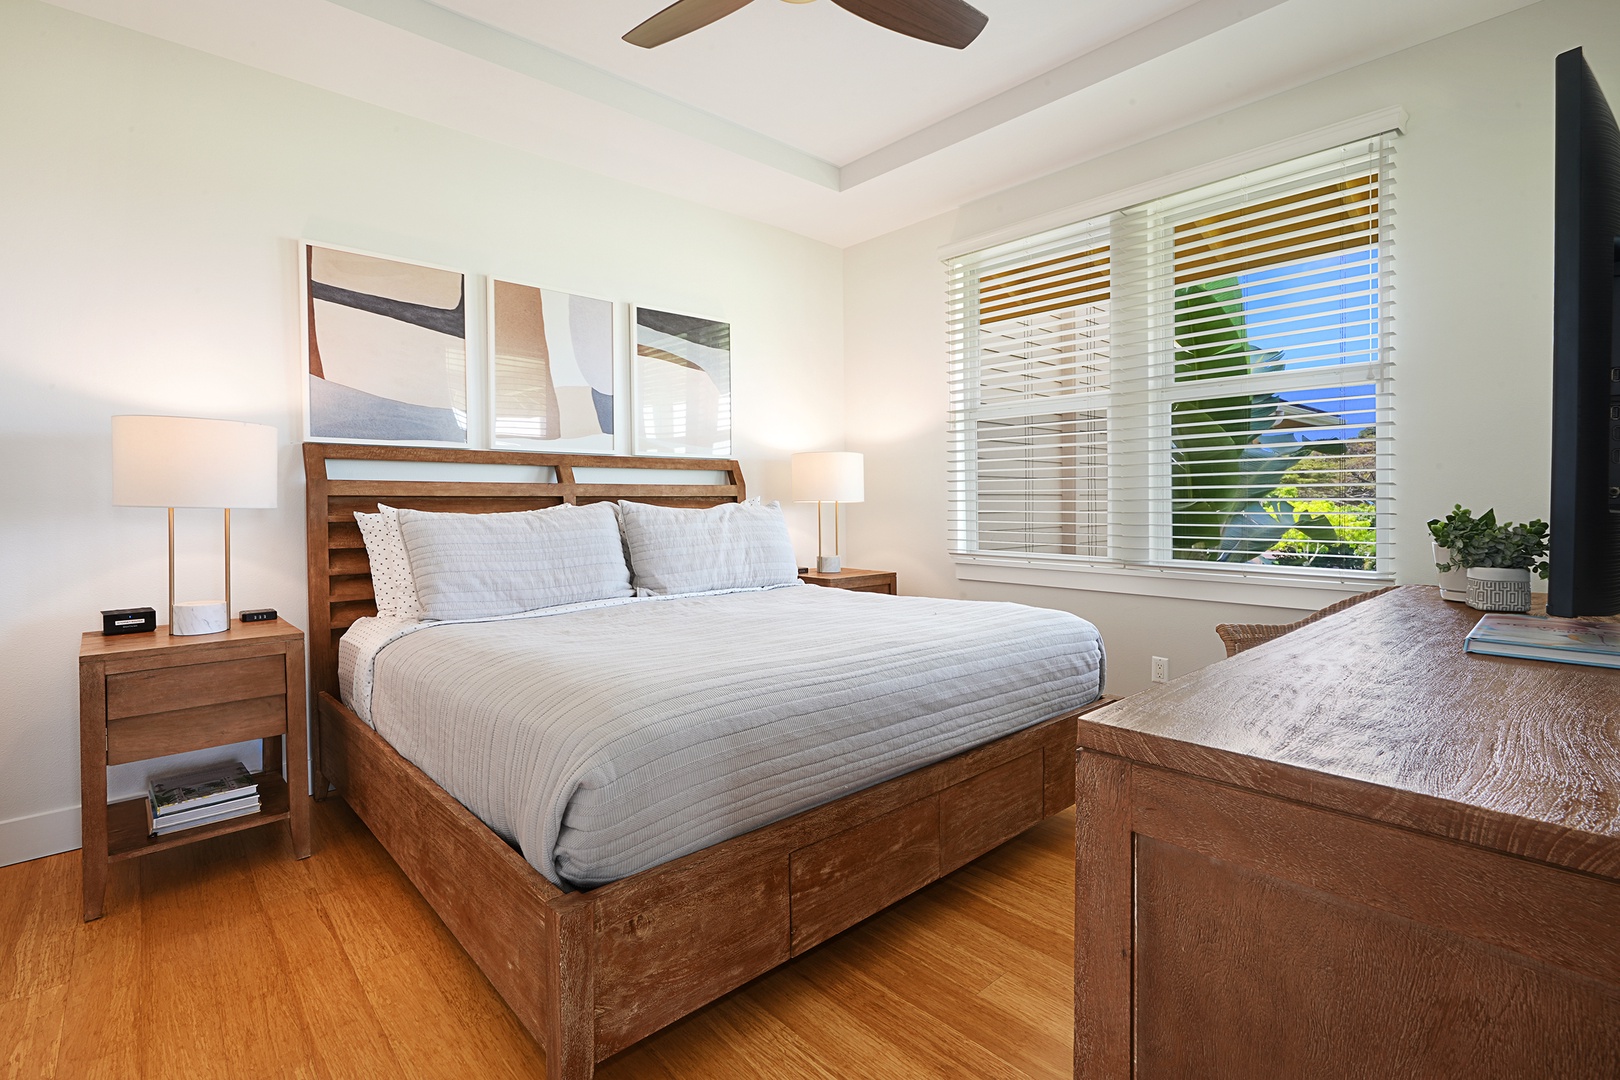 Koloa Vacation Rentals, Pili Mai 11K - The Primary Bedroom has a king bed, ensuite bathroom, and partial ocean and golf course views